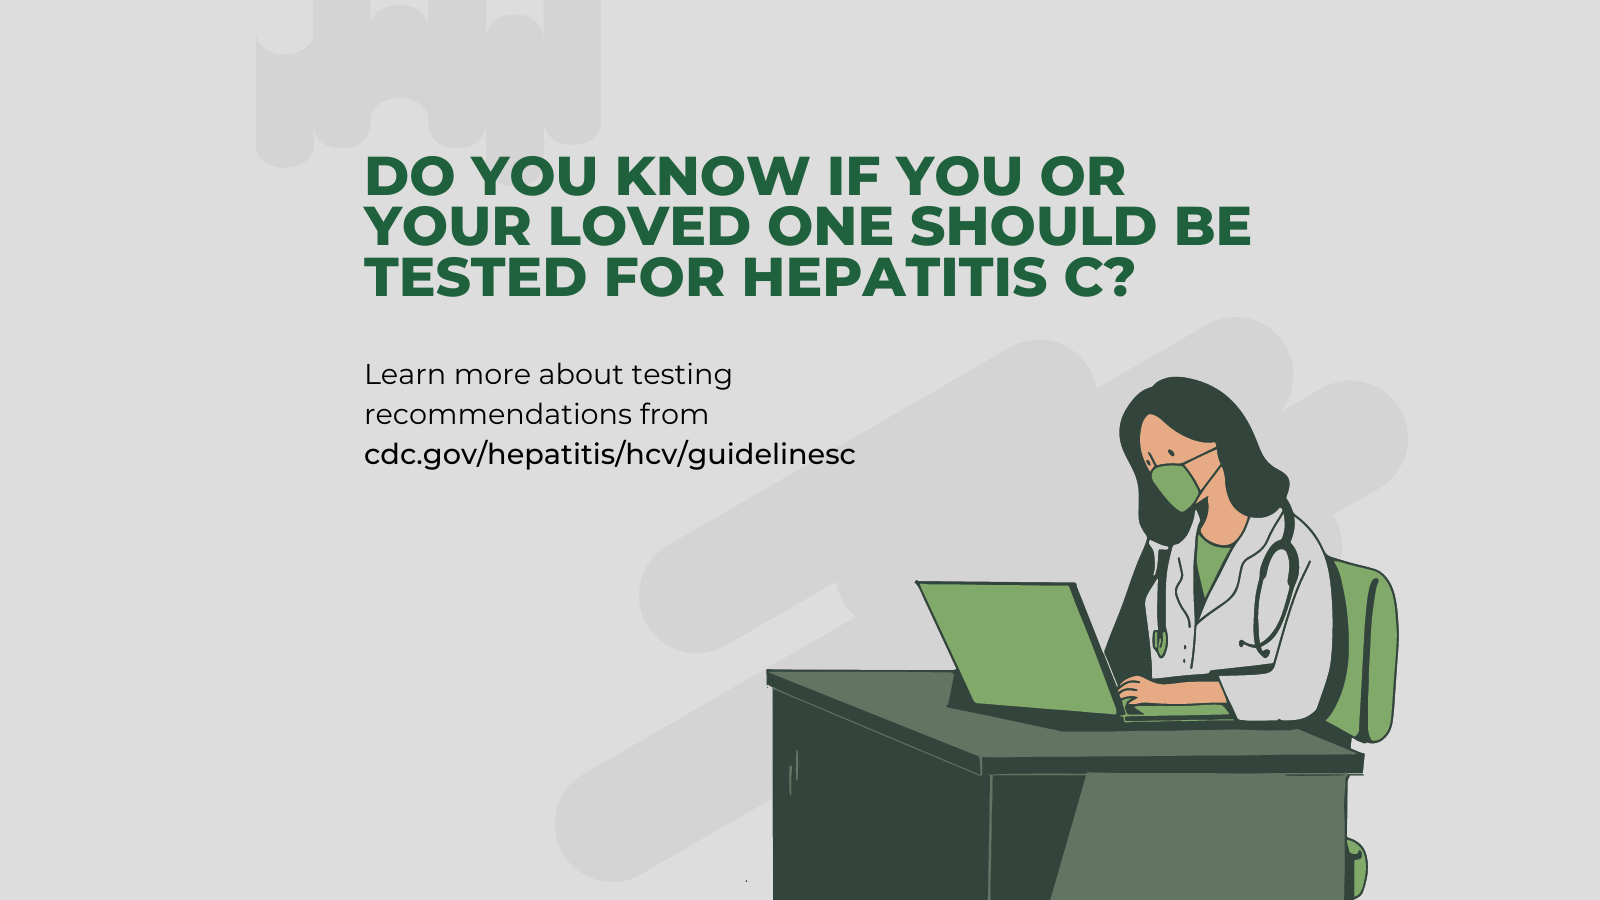 Doctor sitting at desk on her laptop. Text above reads: Do you know if you or your loved one should be tested for hepatitis C? Learn more about testing recommendations from a CDC website